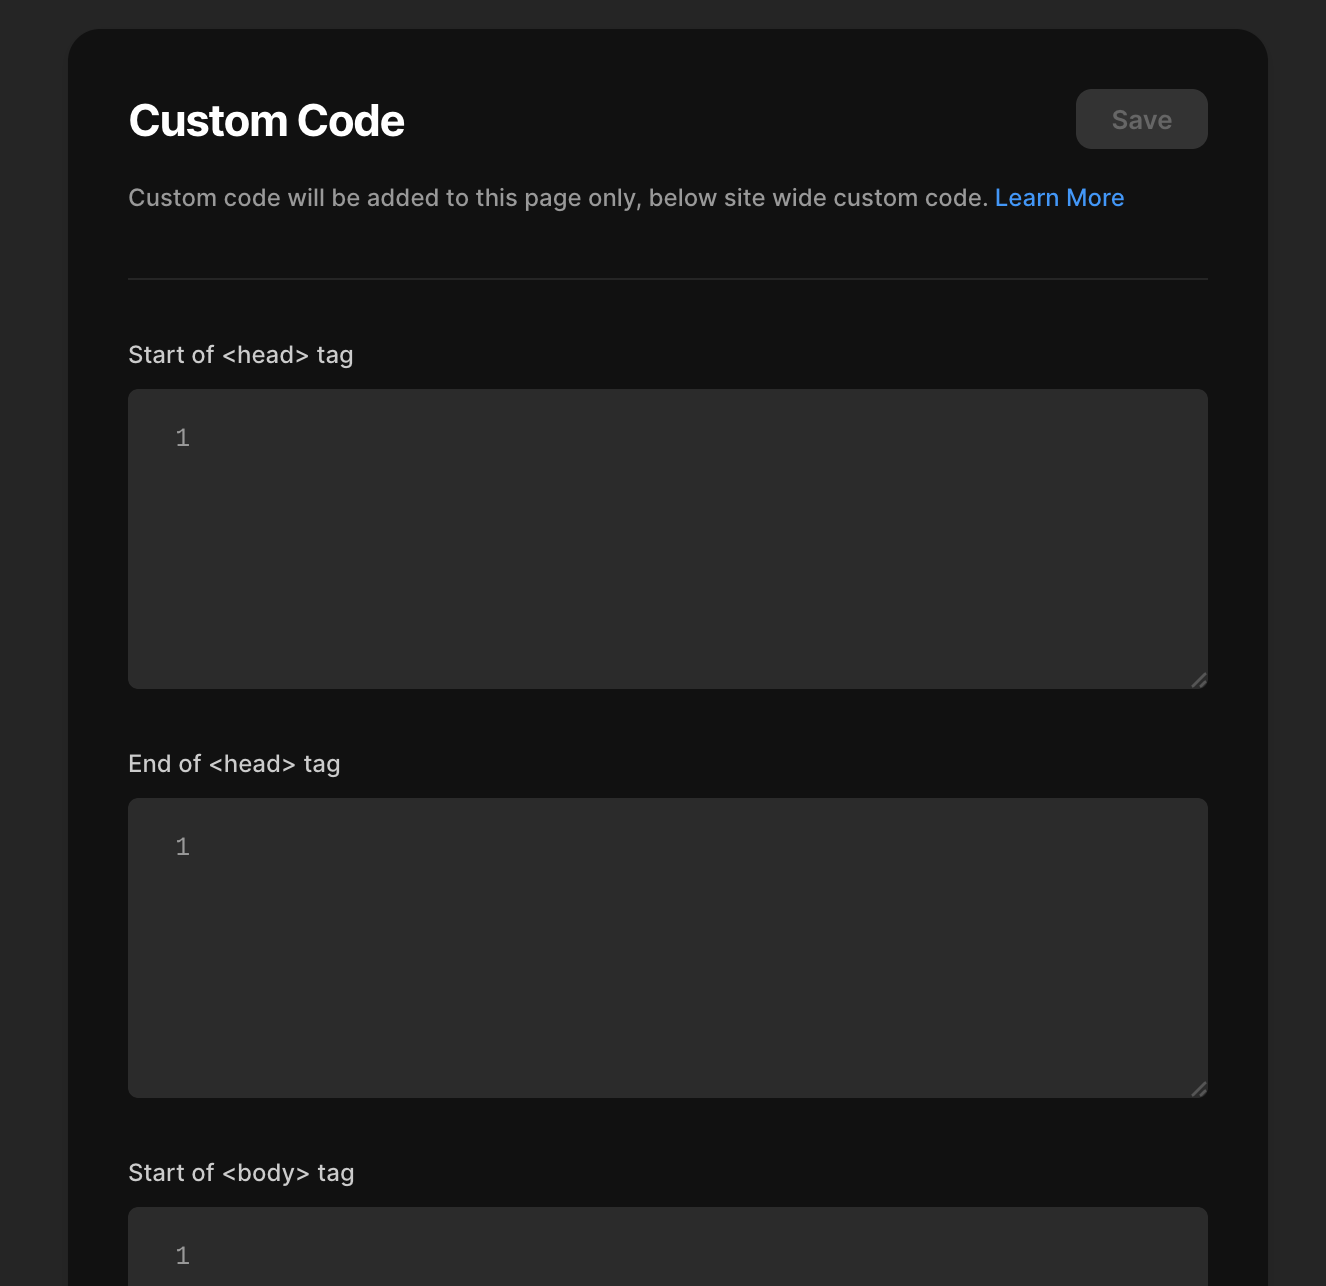 Framer interface to add custom code in the <head> and <body> of the site